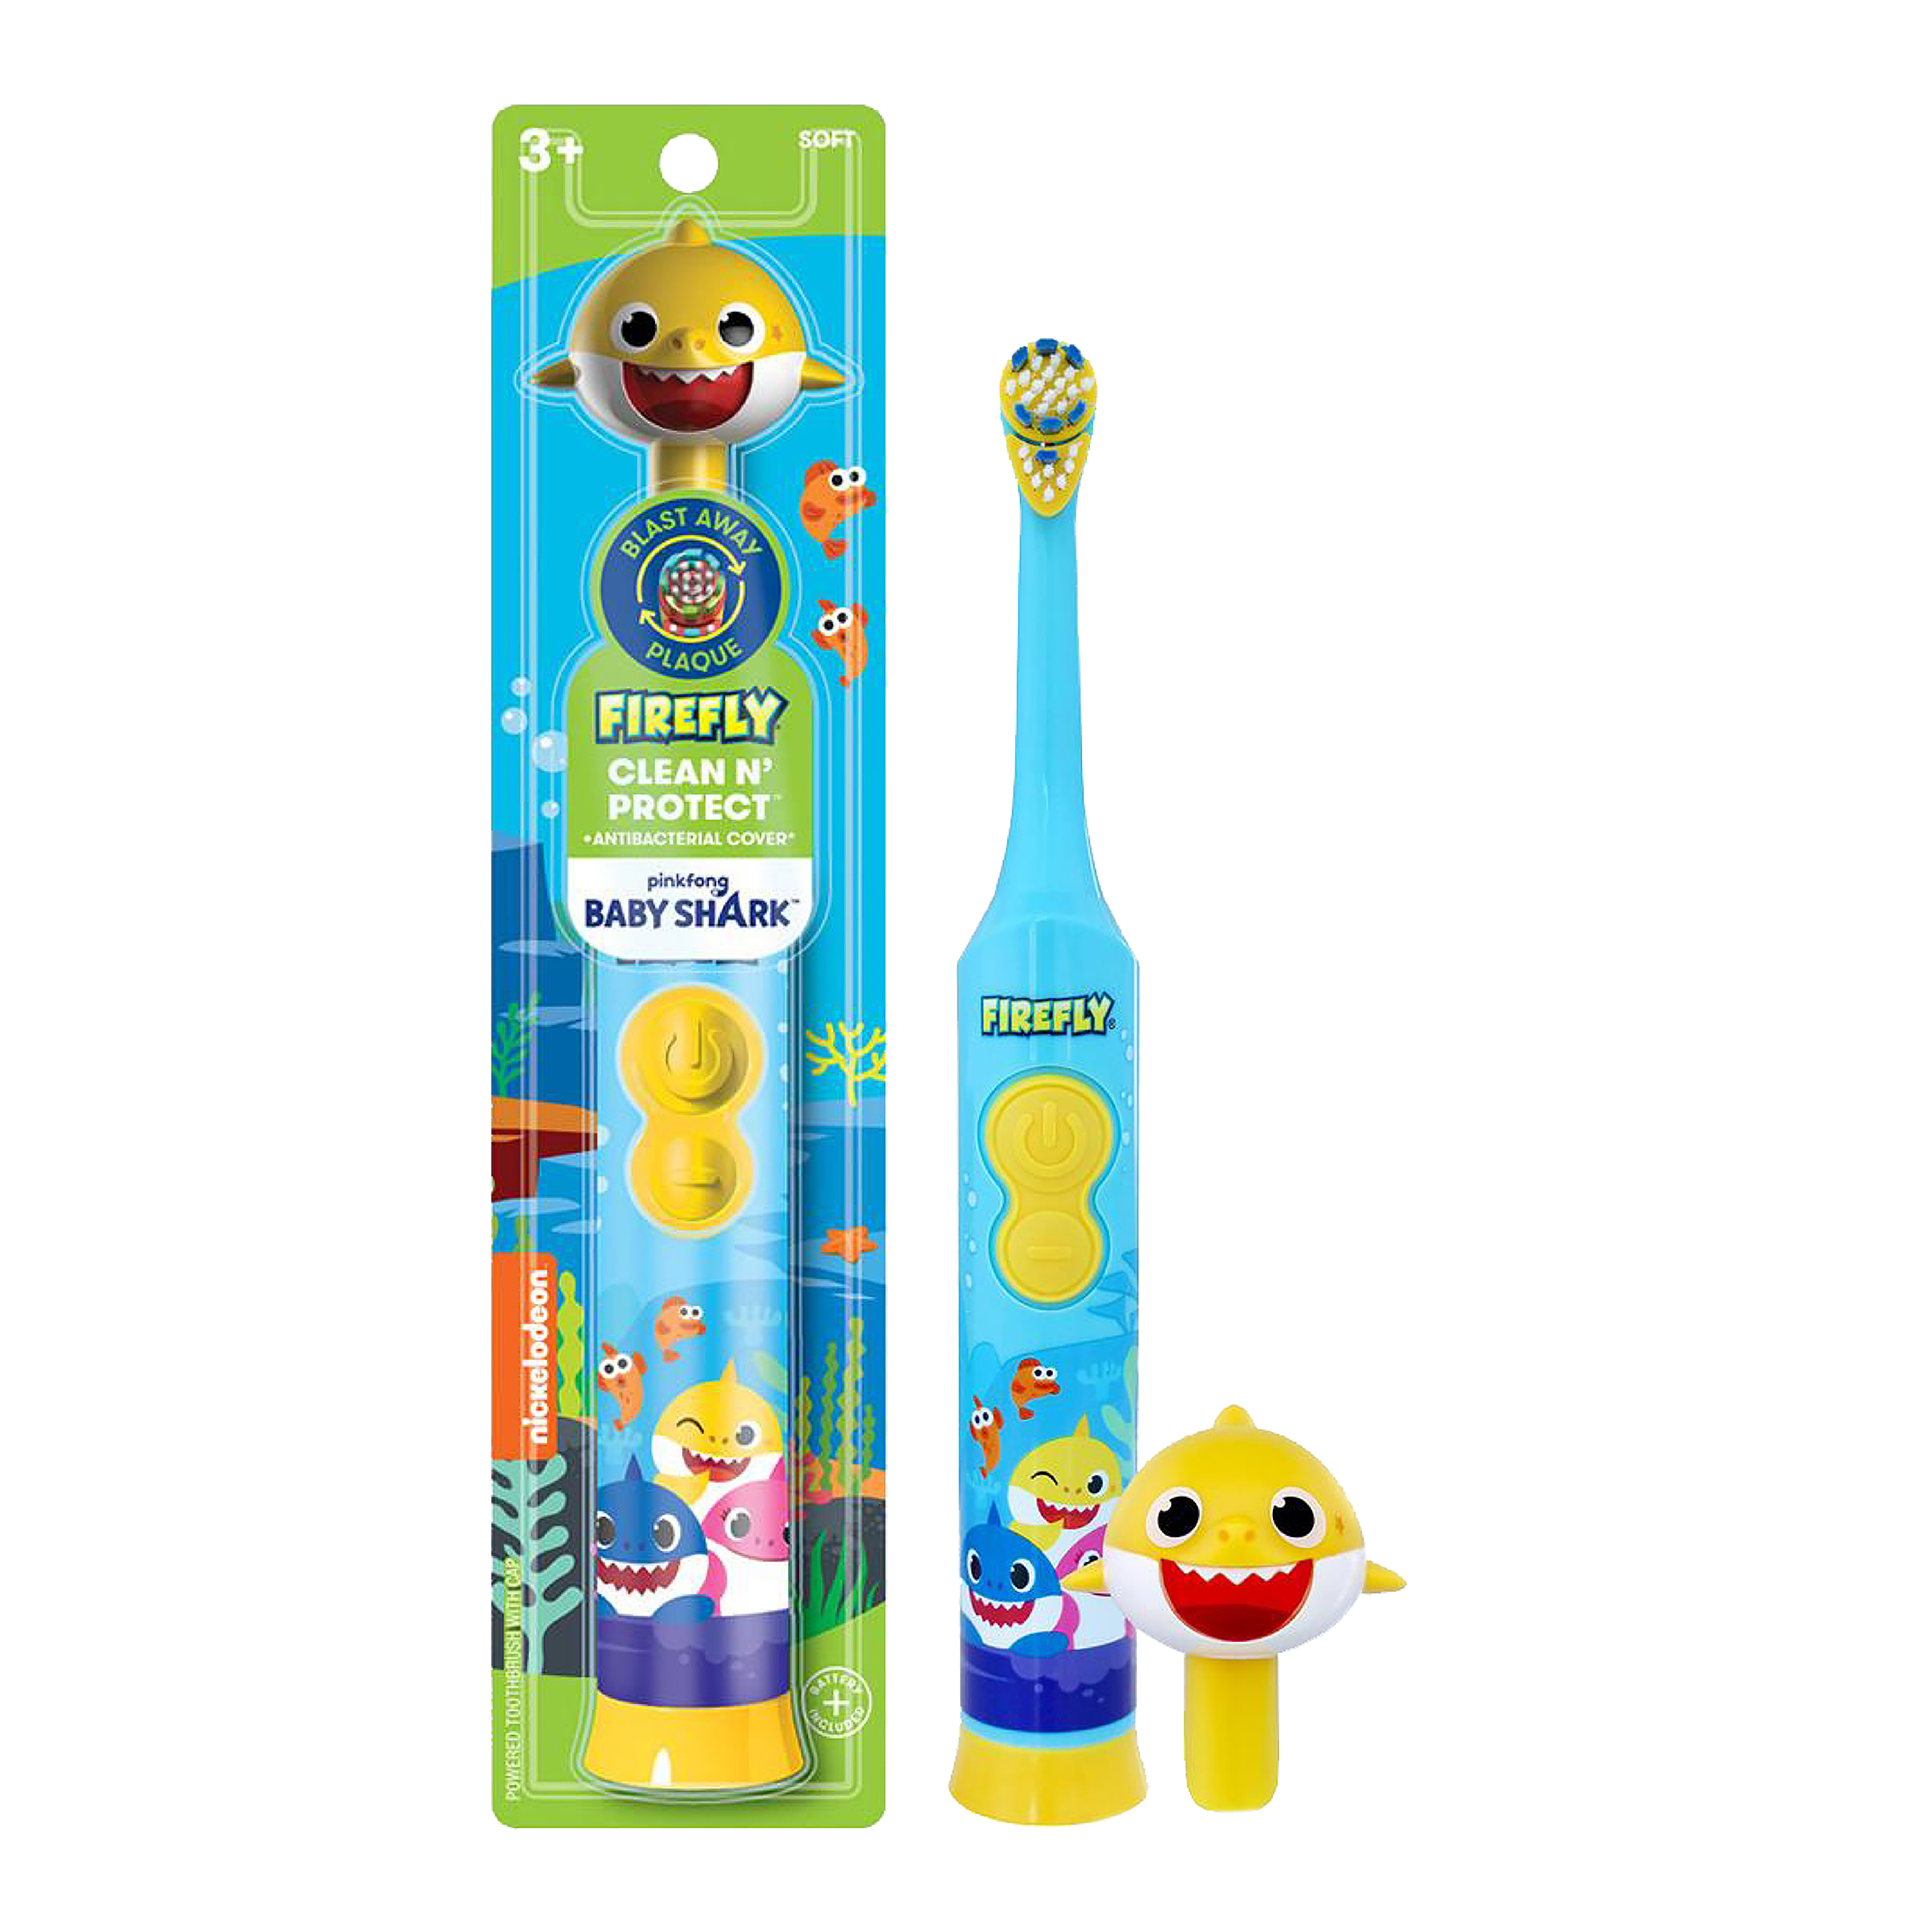 Firefly Clean N' Protect, Baby Shark Toothbrush, Antibacterial Cover, Soft, Ages 3+, 1 Count - image 1 of 9